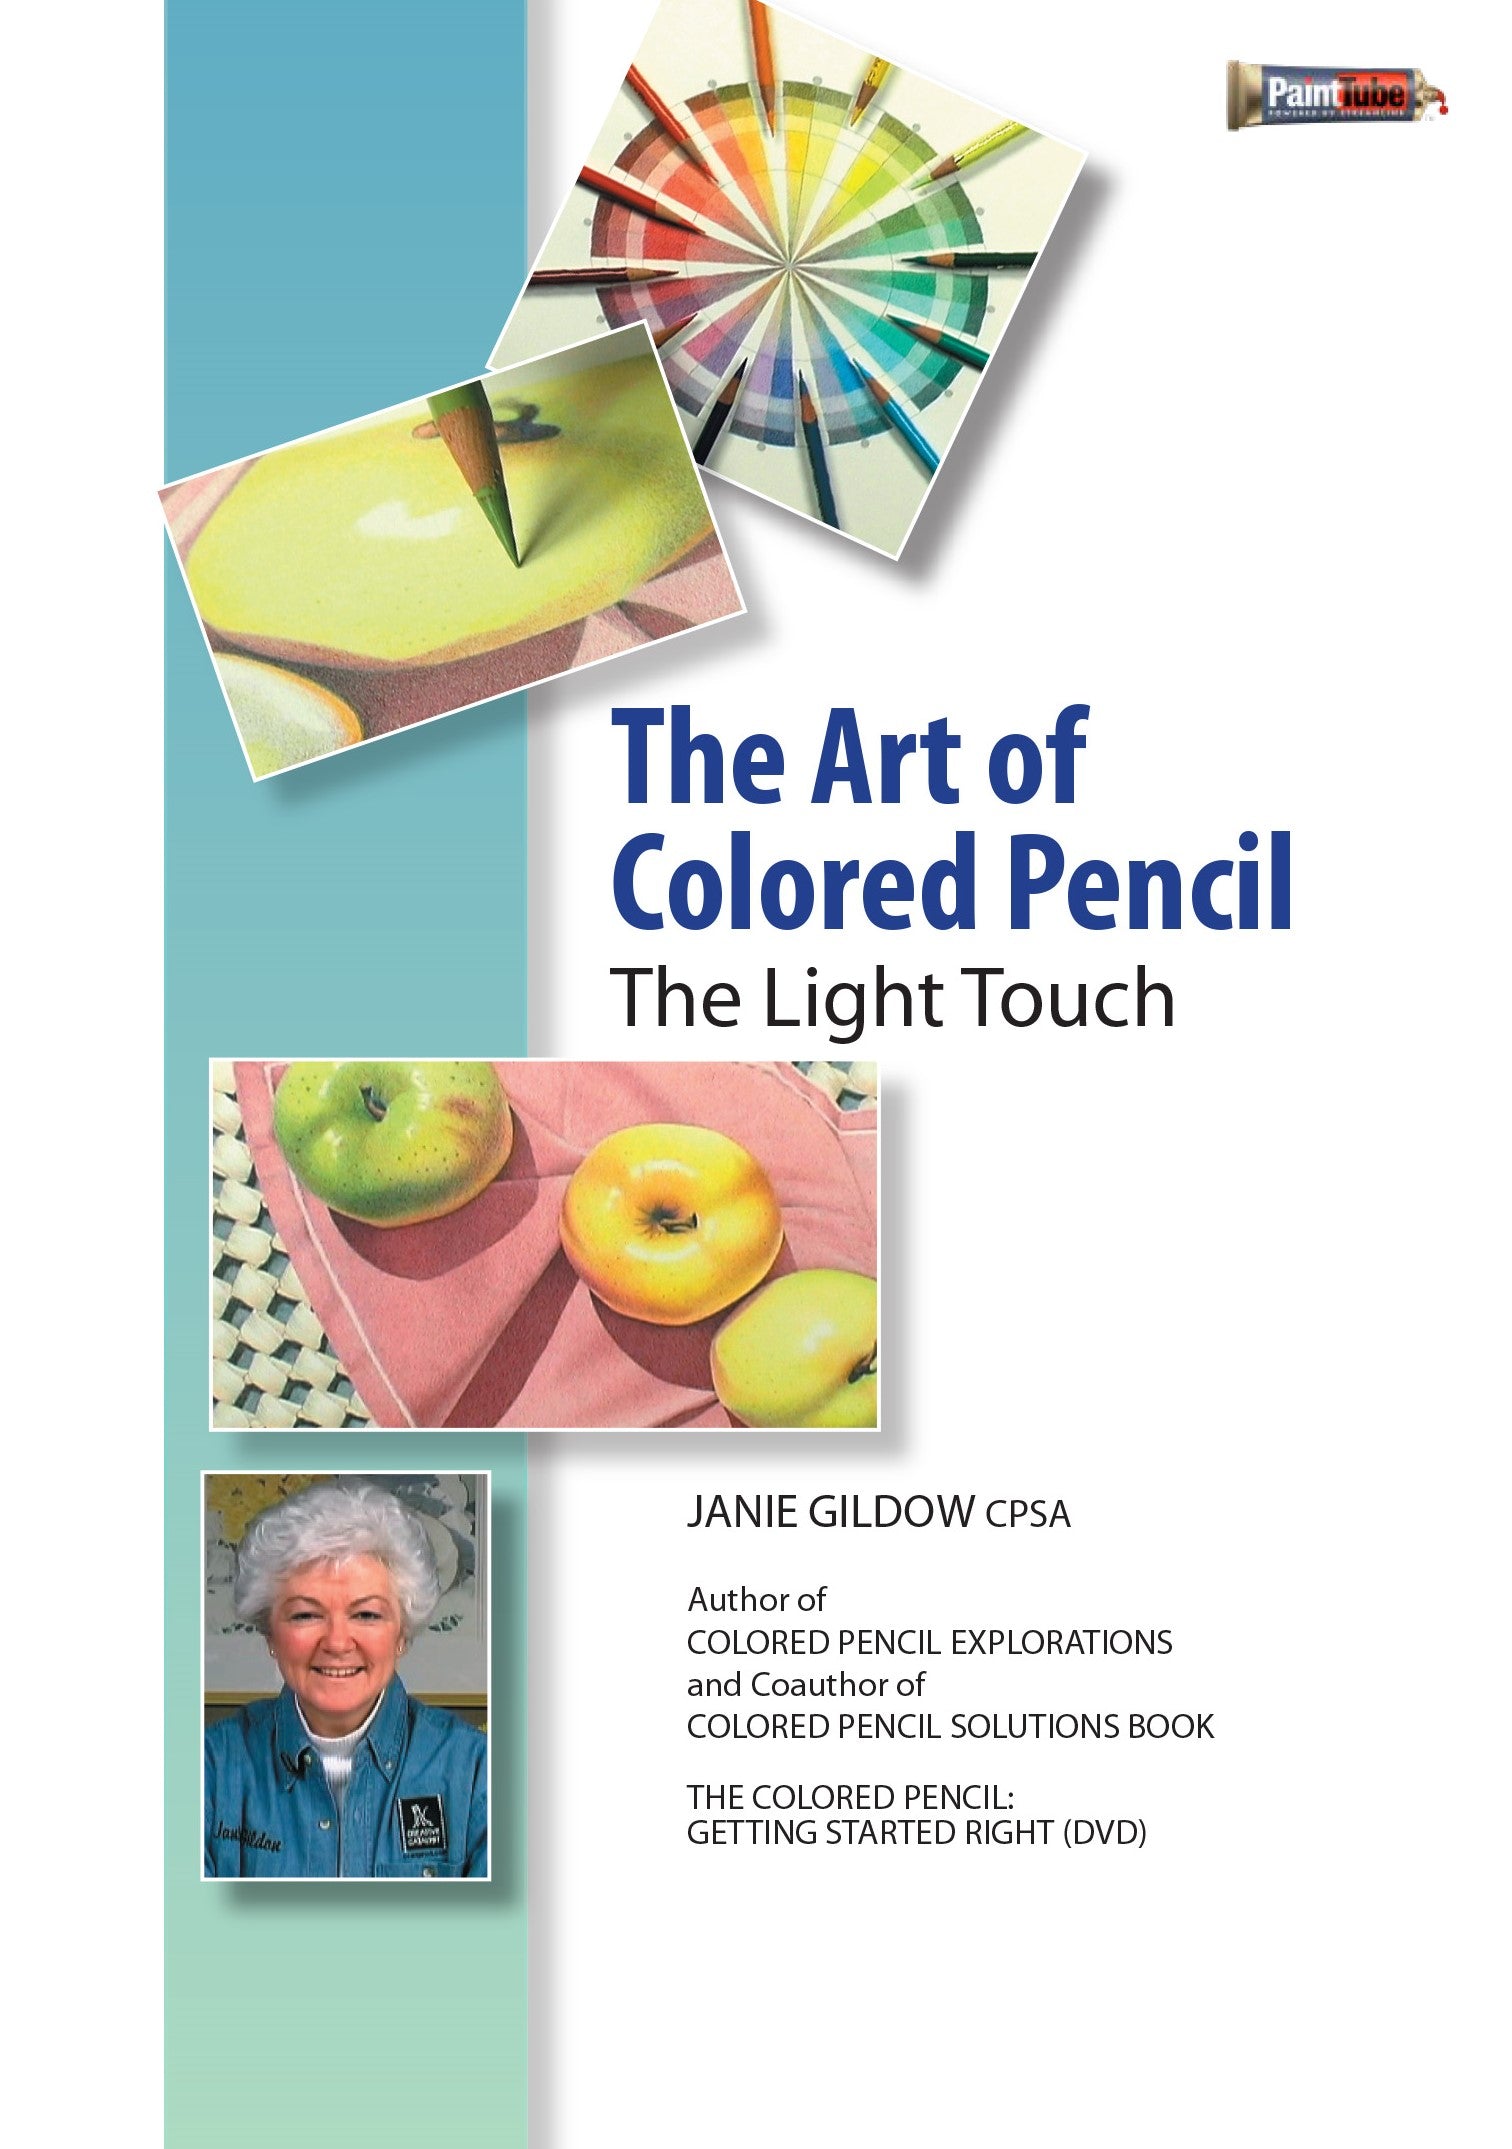 Janie Gildow: The Art of Colored Pencil - The Light Touch